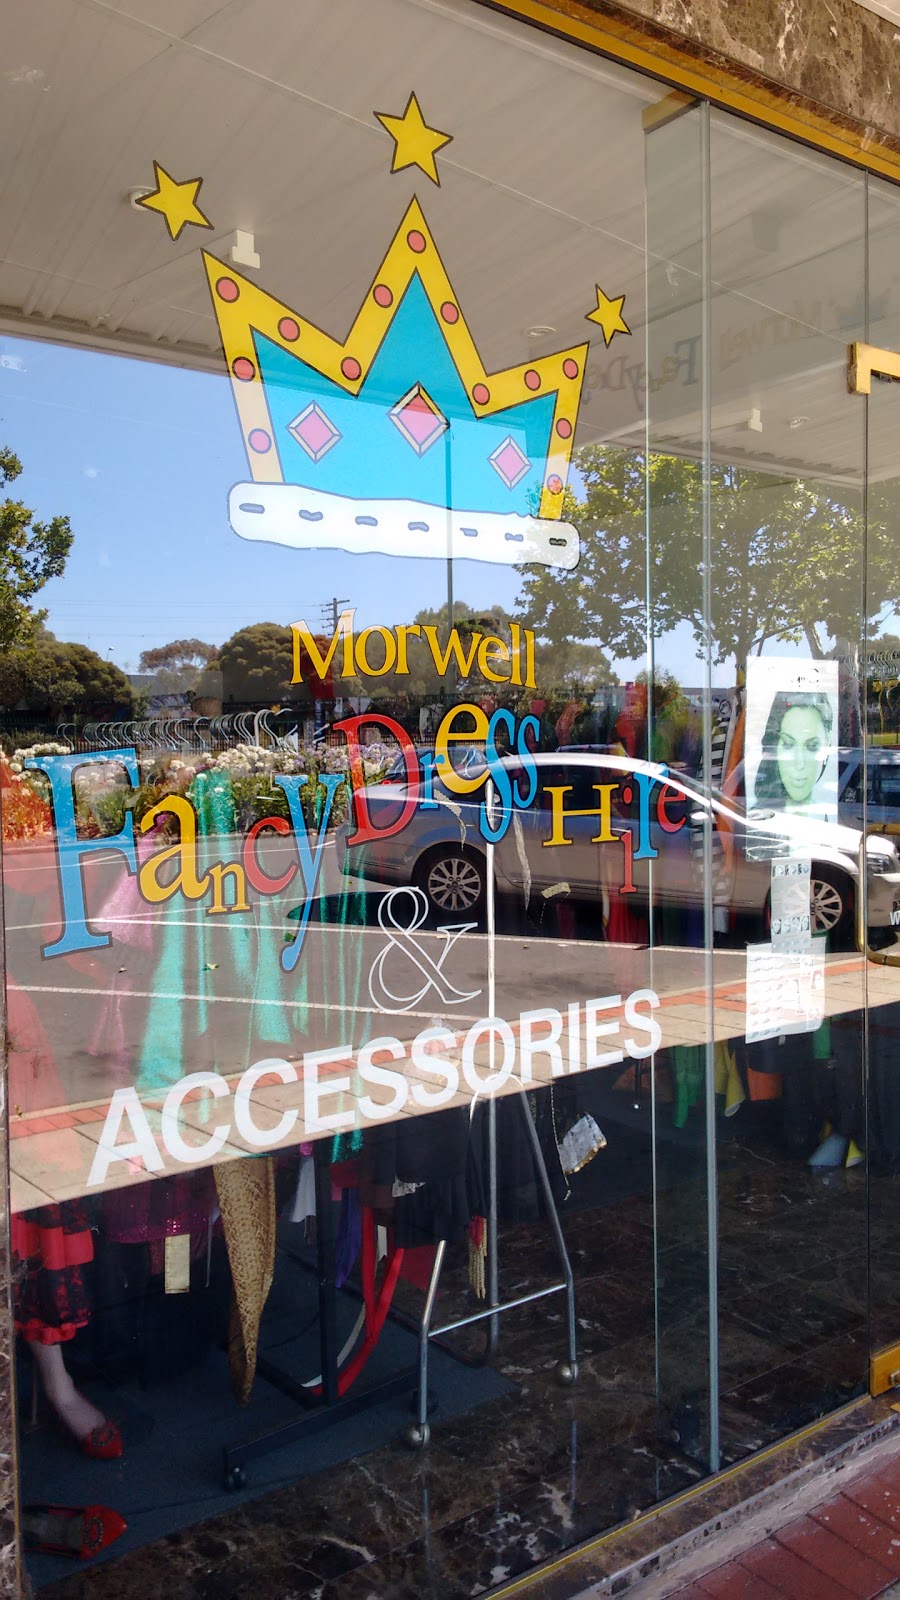 Morwell Fancy Dress Hire | clothing store | 126 Mary St, Morwell VIC 3840, Australia | 0351339588 OR +61 3 5133 9588